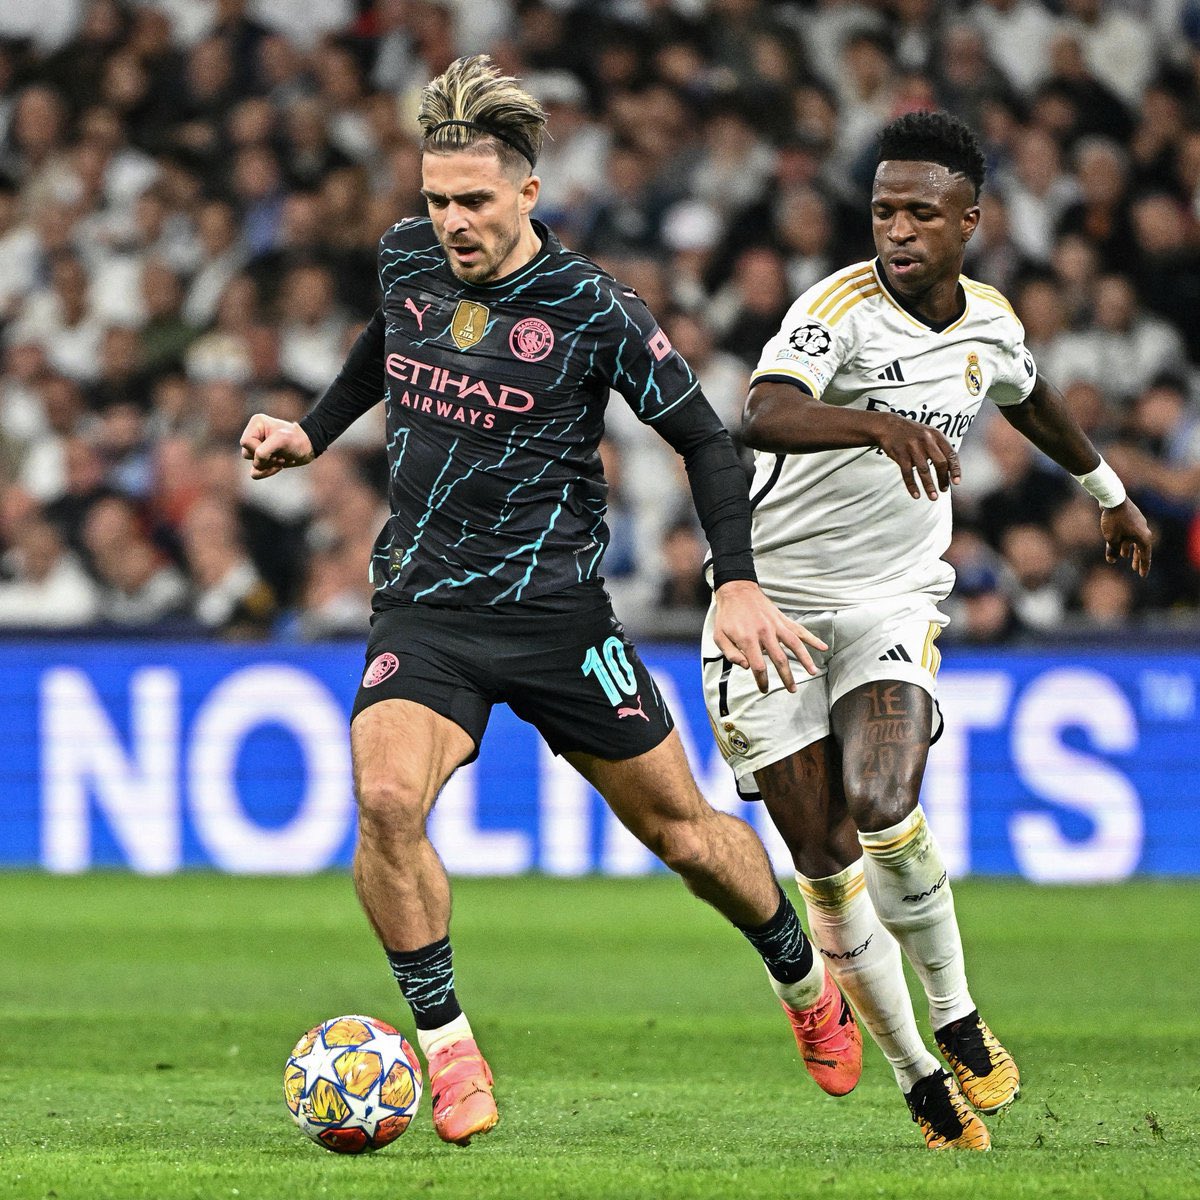 Big praise for Jack Grealish last night, in fact since he’s returned from injury. Absolutely incredible footballer, changes the game when he’s on the pitch A footballer who doesn’t need G/A to see his quality